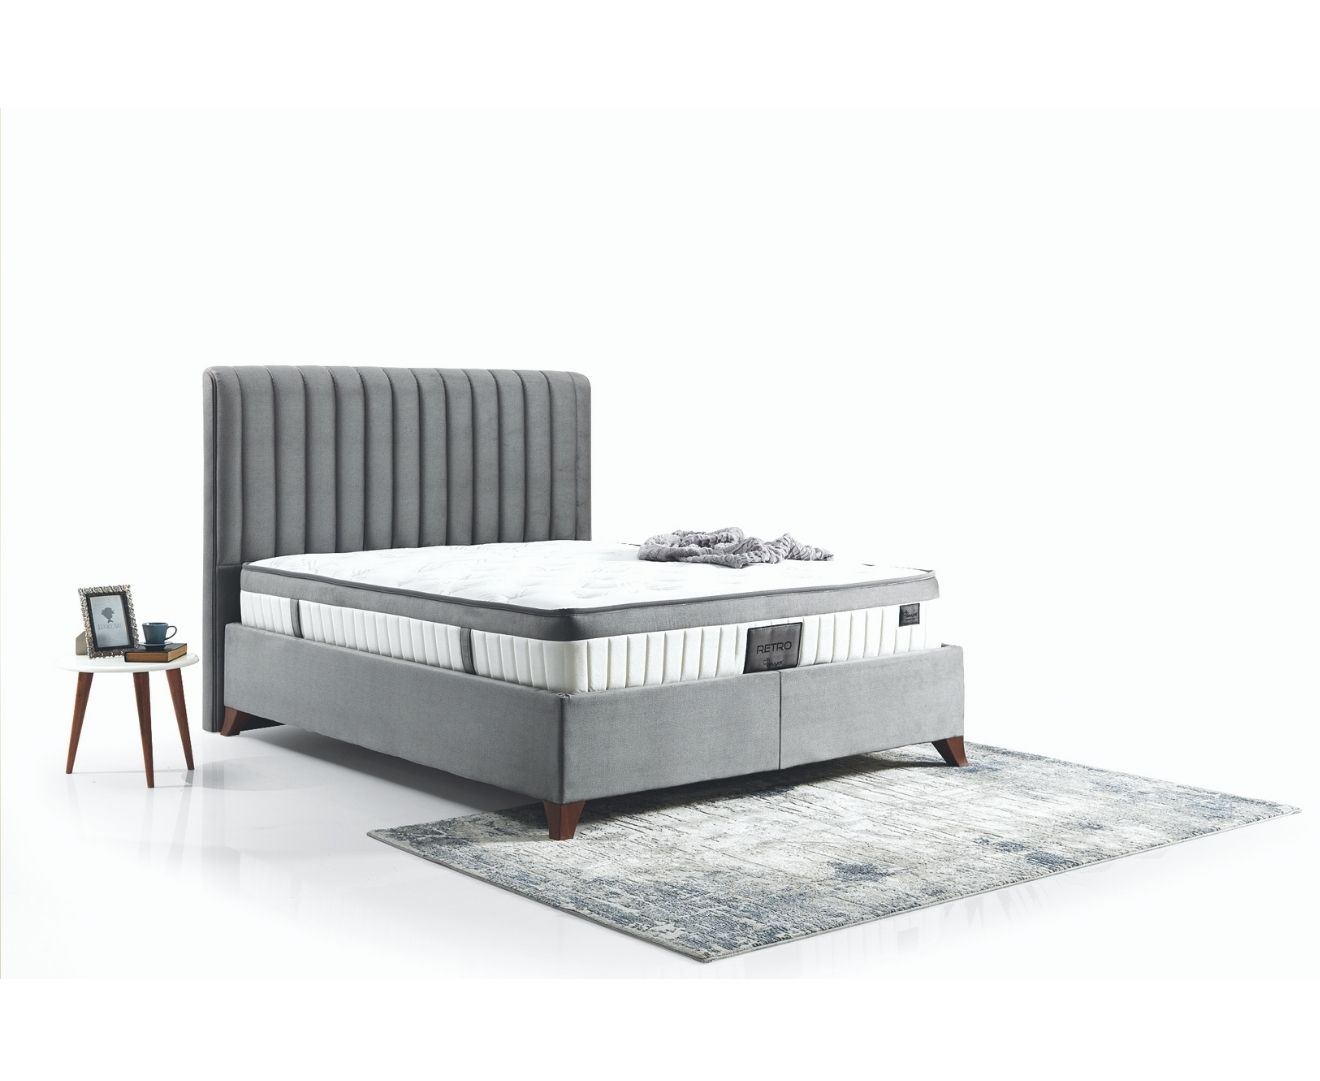 MATTRES AND BEDBASE